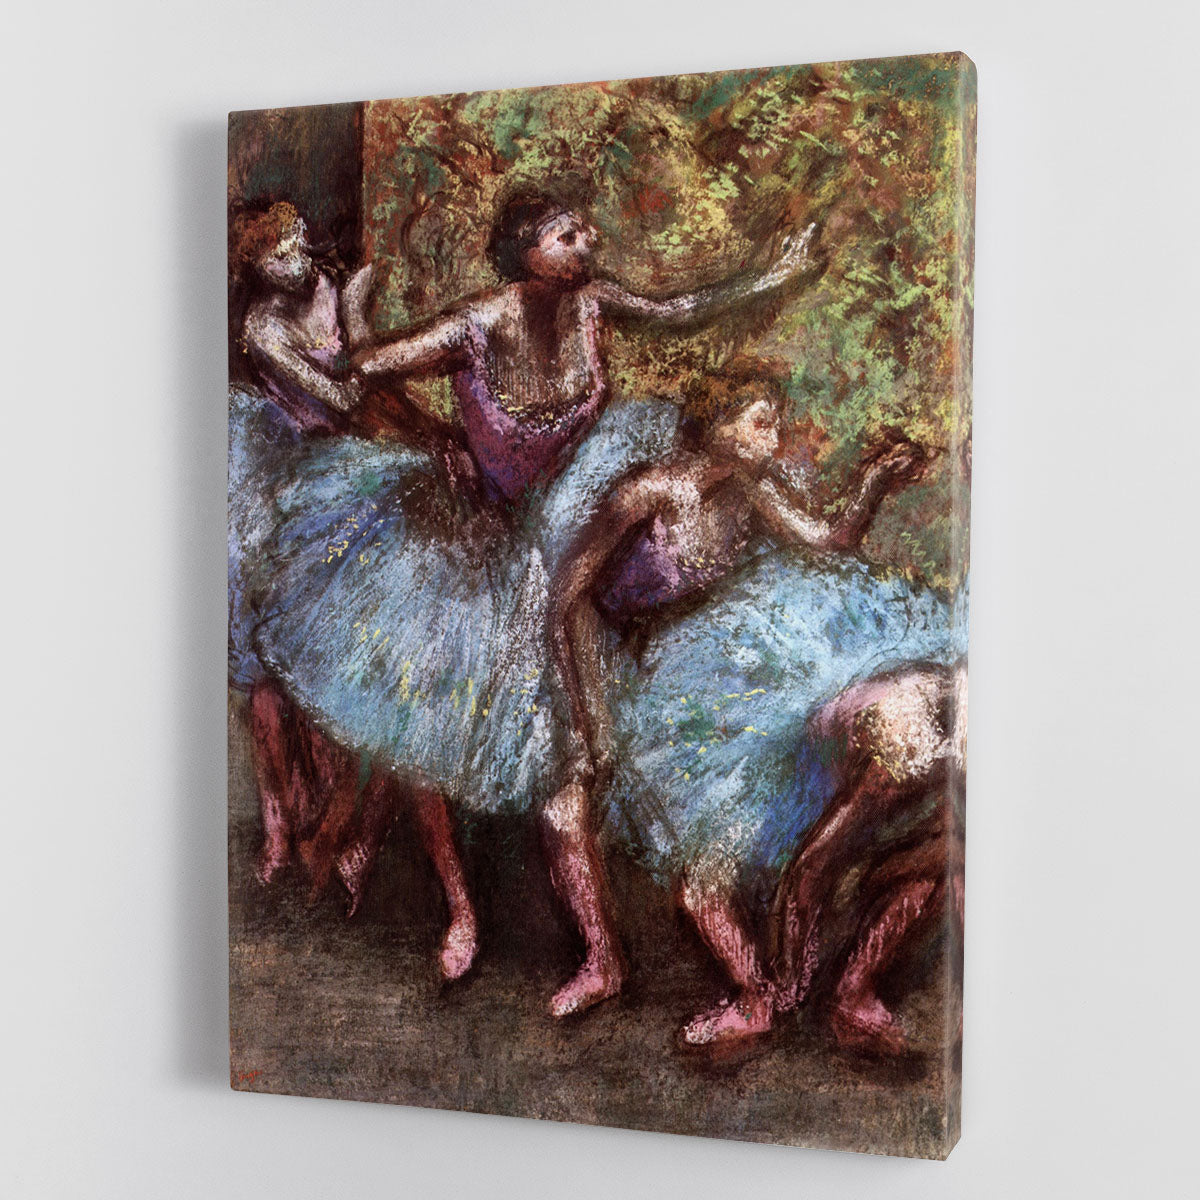 Four dancers behind the scenes 1 by Degas Canvas Print or Poster - Canvas Art Rocks - 1